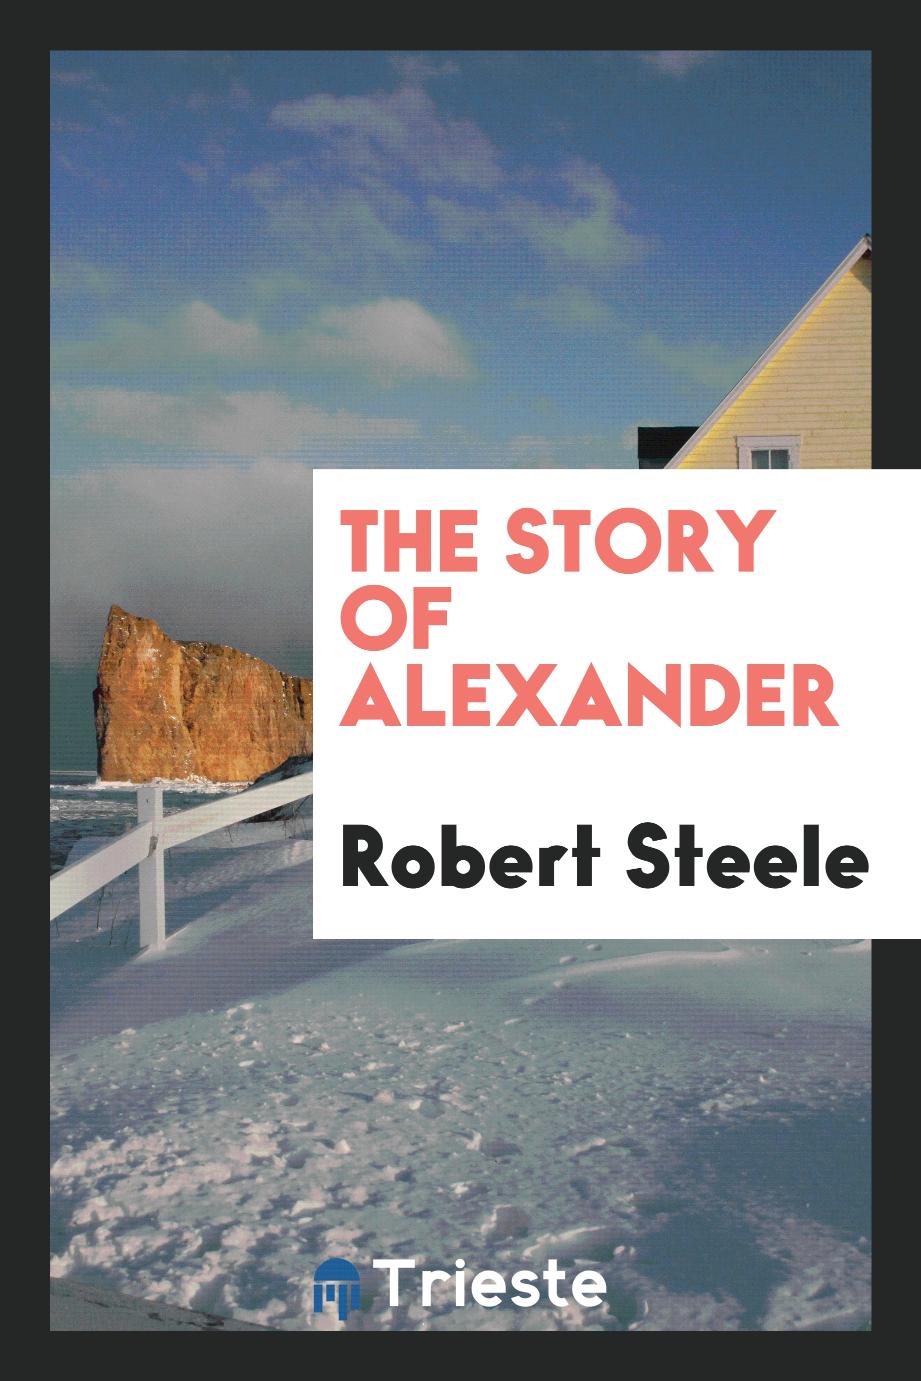 The story of Alexander